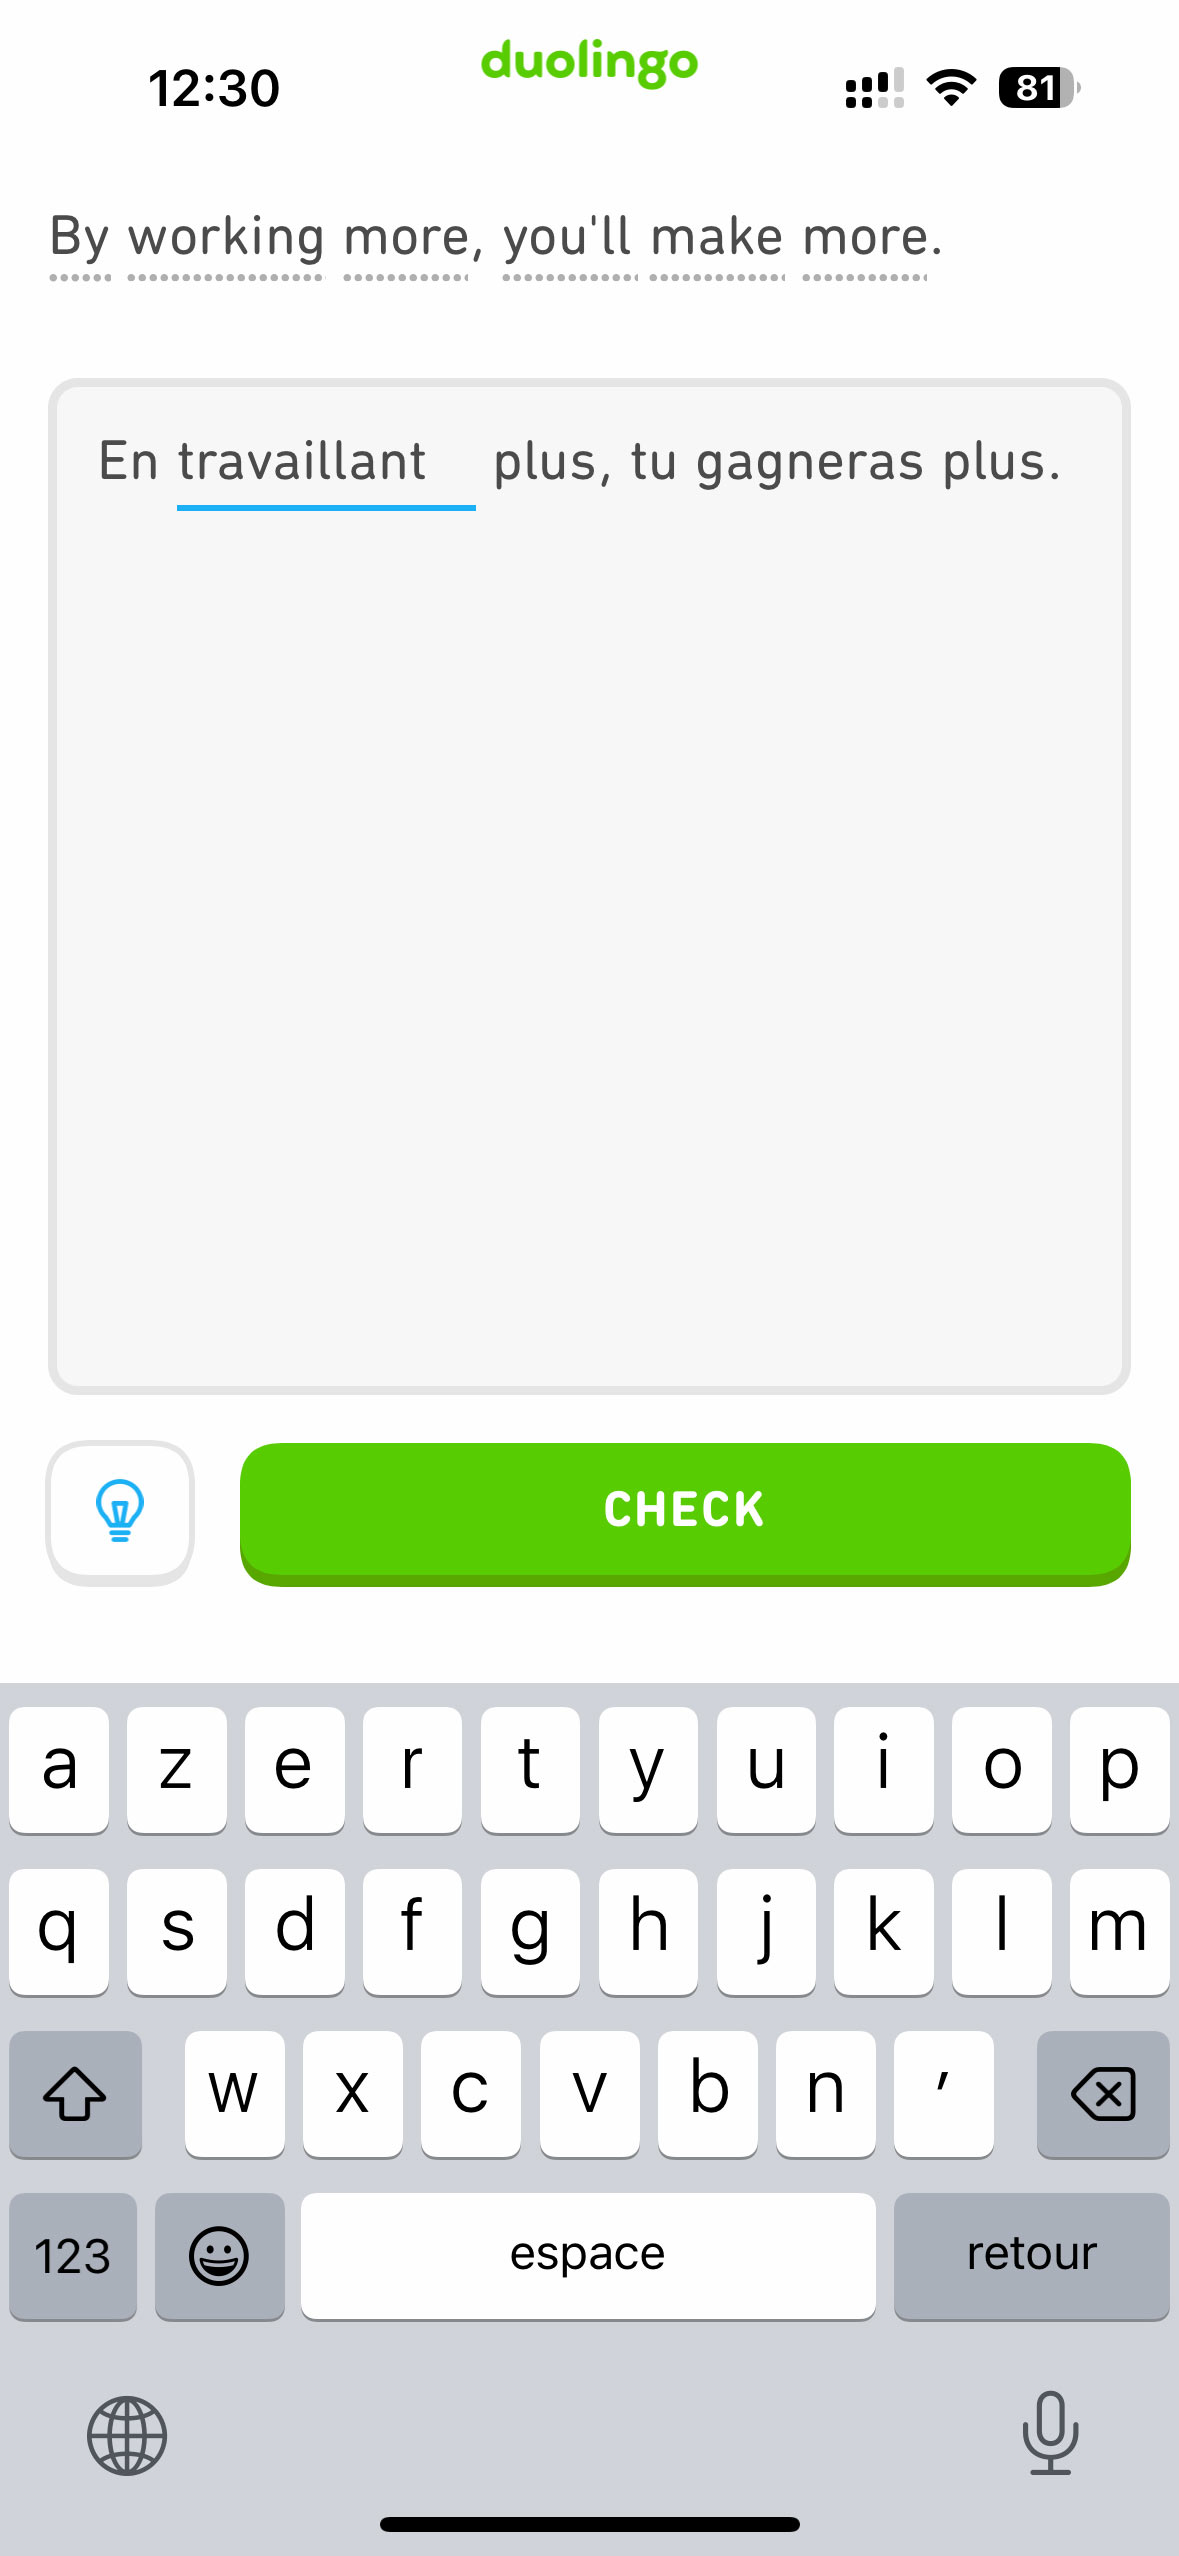 A screenshot of a complete the translation exercise on the Duolingo mobile app.